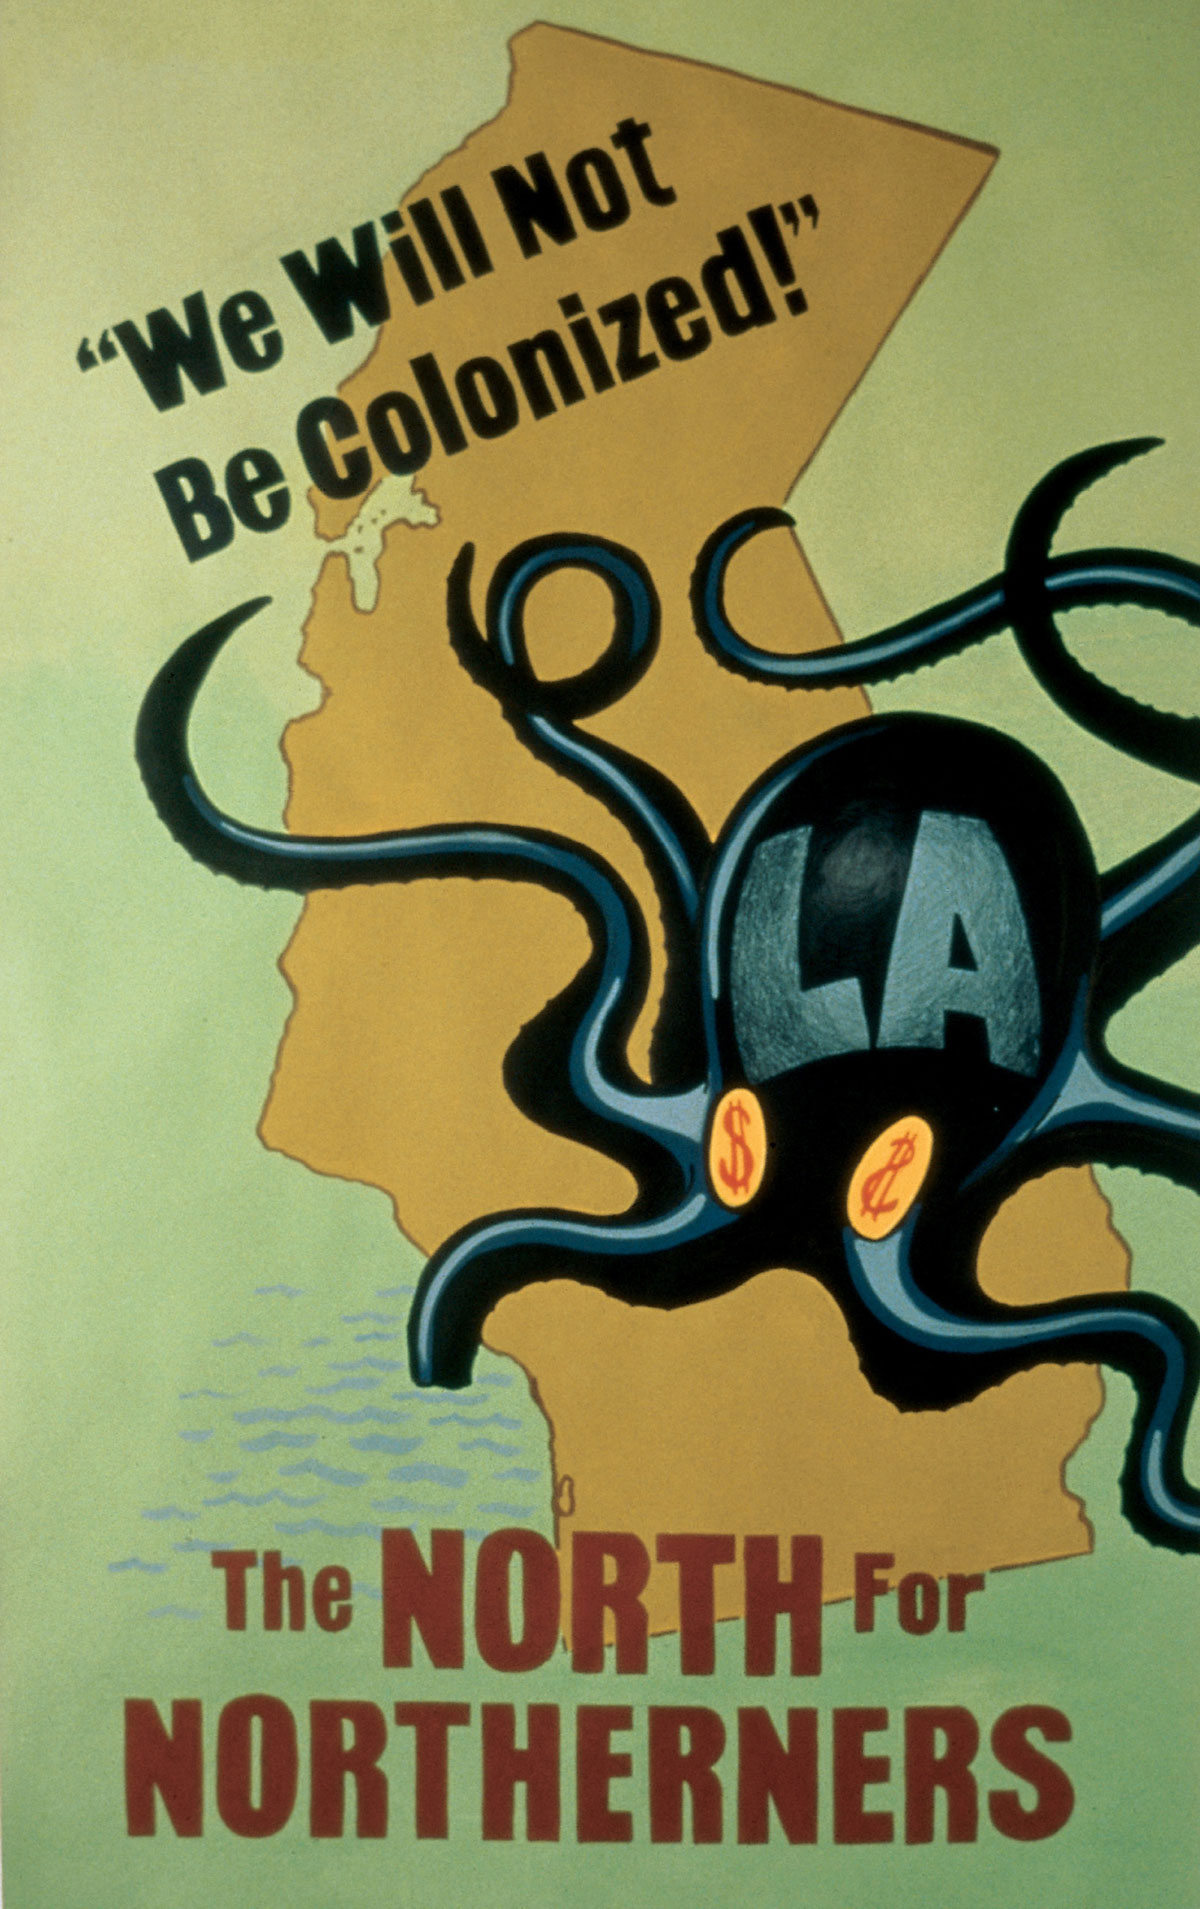 Poster by artist Sandow Birk depicting the state of California being attacked by a giant octopus labeled “L.A.” The poster is captioned “We Will Not Be Colonized” and “The North for Northerners.”